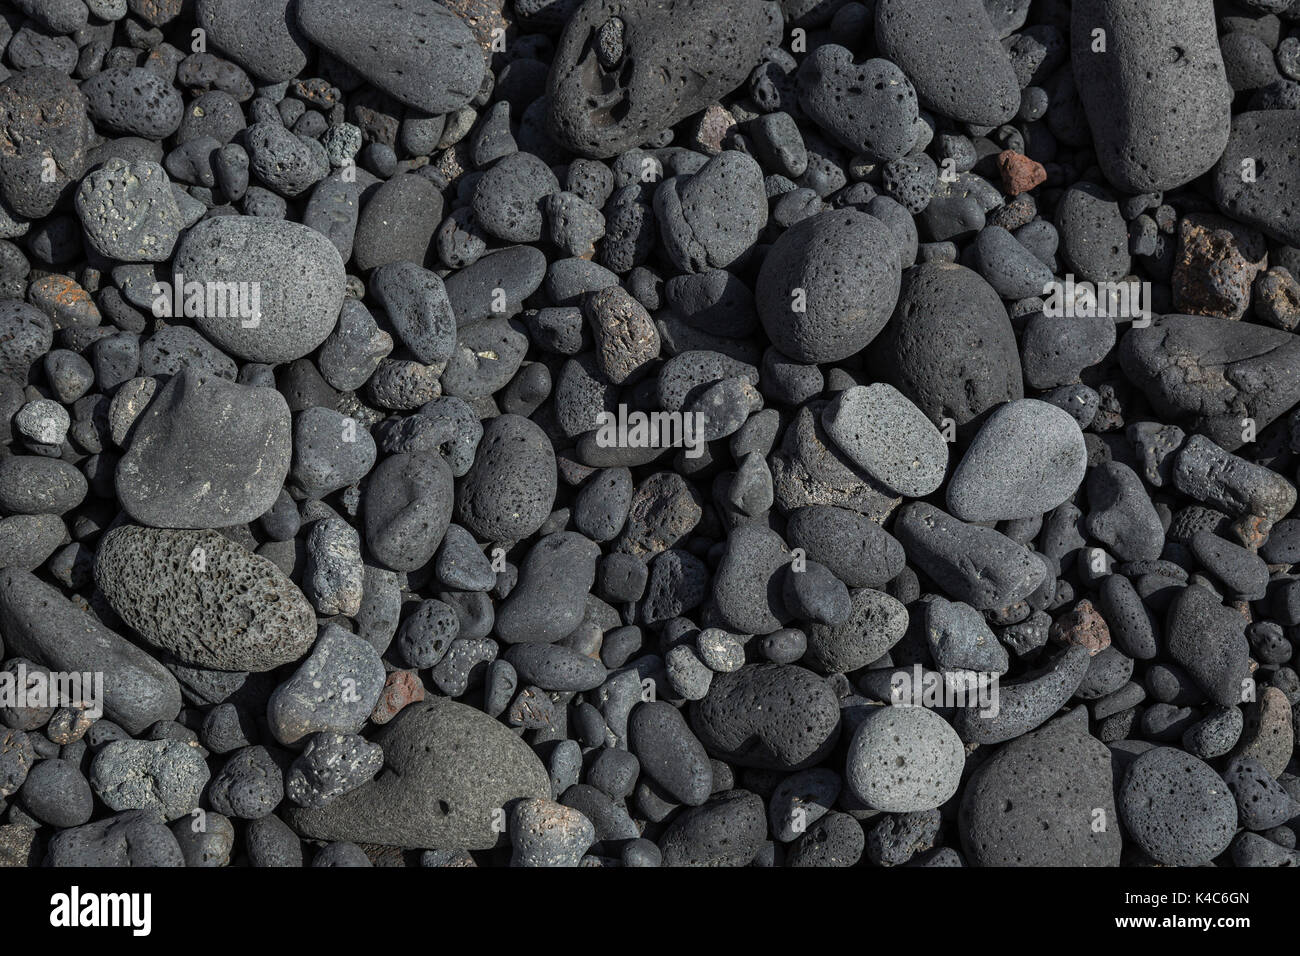 Washed Gray Stones Of Volcanic Origin On The Beach Stock Photo